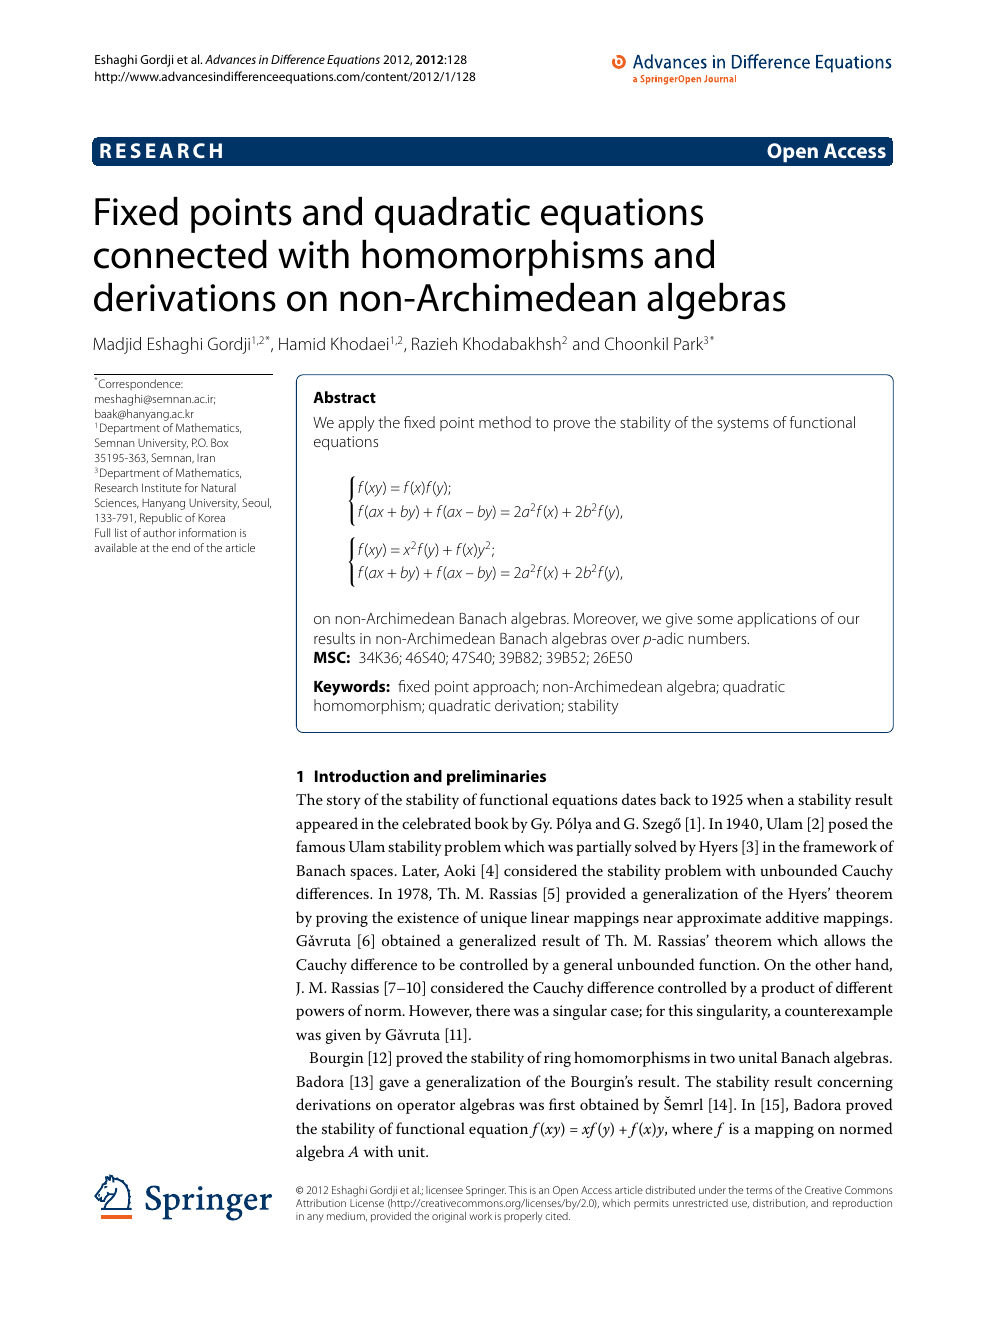 Fixed Points And Quadratic Equations Connected With Homomorphisms And Derivations On Non Archimedean Algebras Topic Of Research Paper In Mathematics Download Scholarly Article Pdf And Read For Free On Cyberleninka Open Science